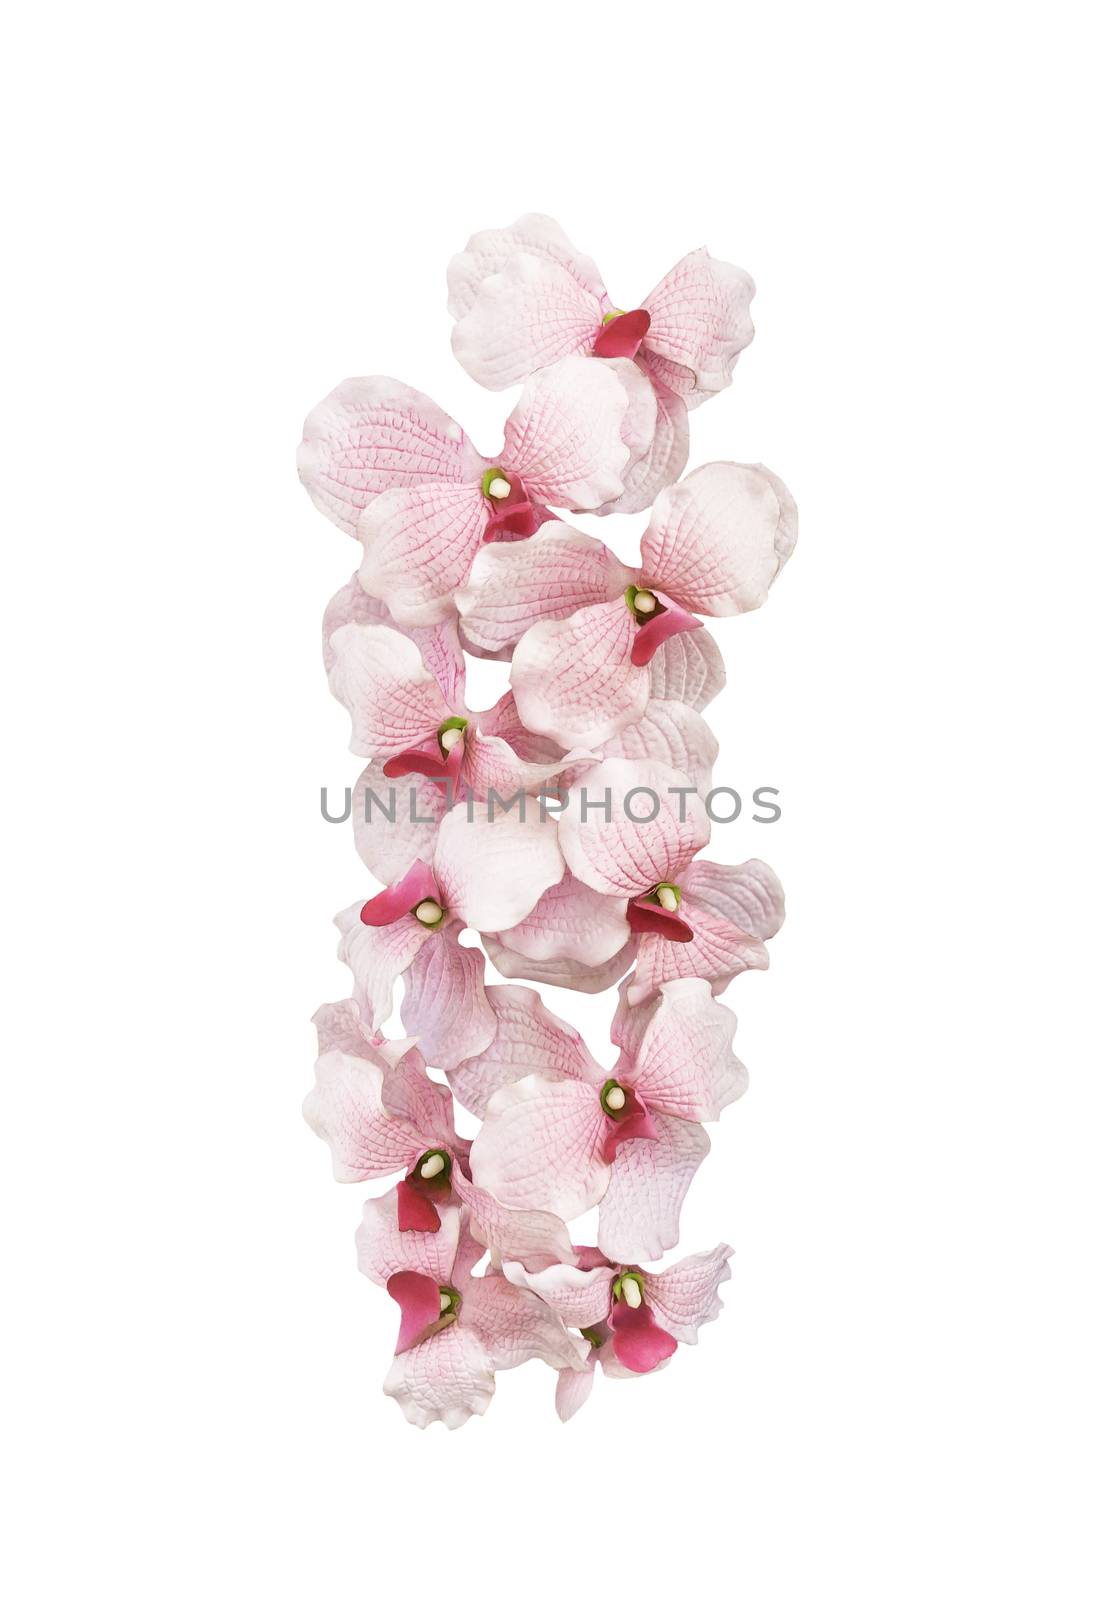 Artifical pink orchid flowers isolated by manusy